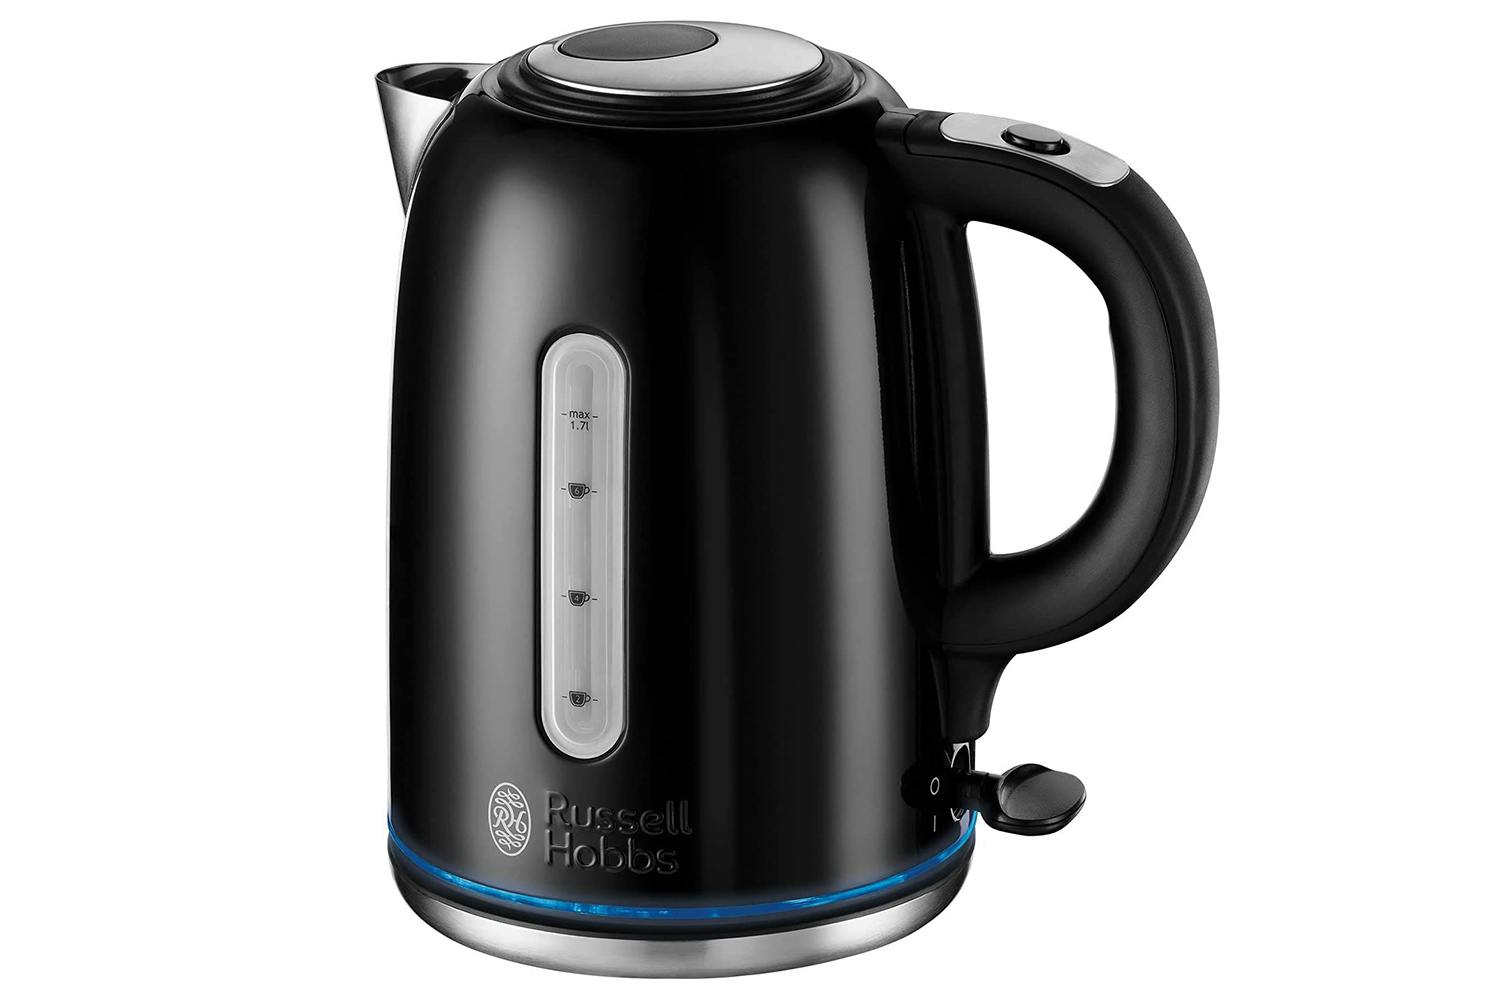 https://hniesfp.imgix.net/8/images/detailed/278/Kettle_Russell_Hobbs_20462.jpg?fit=fill&bg=0FFF&w=1500&h=1000&auto=format,compress